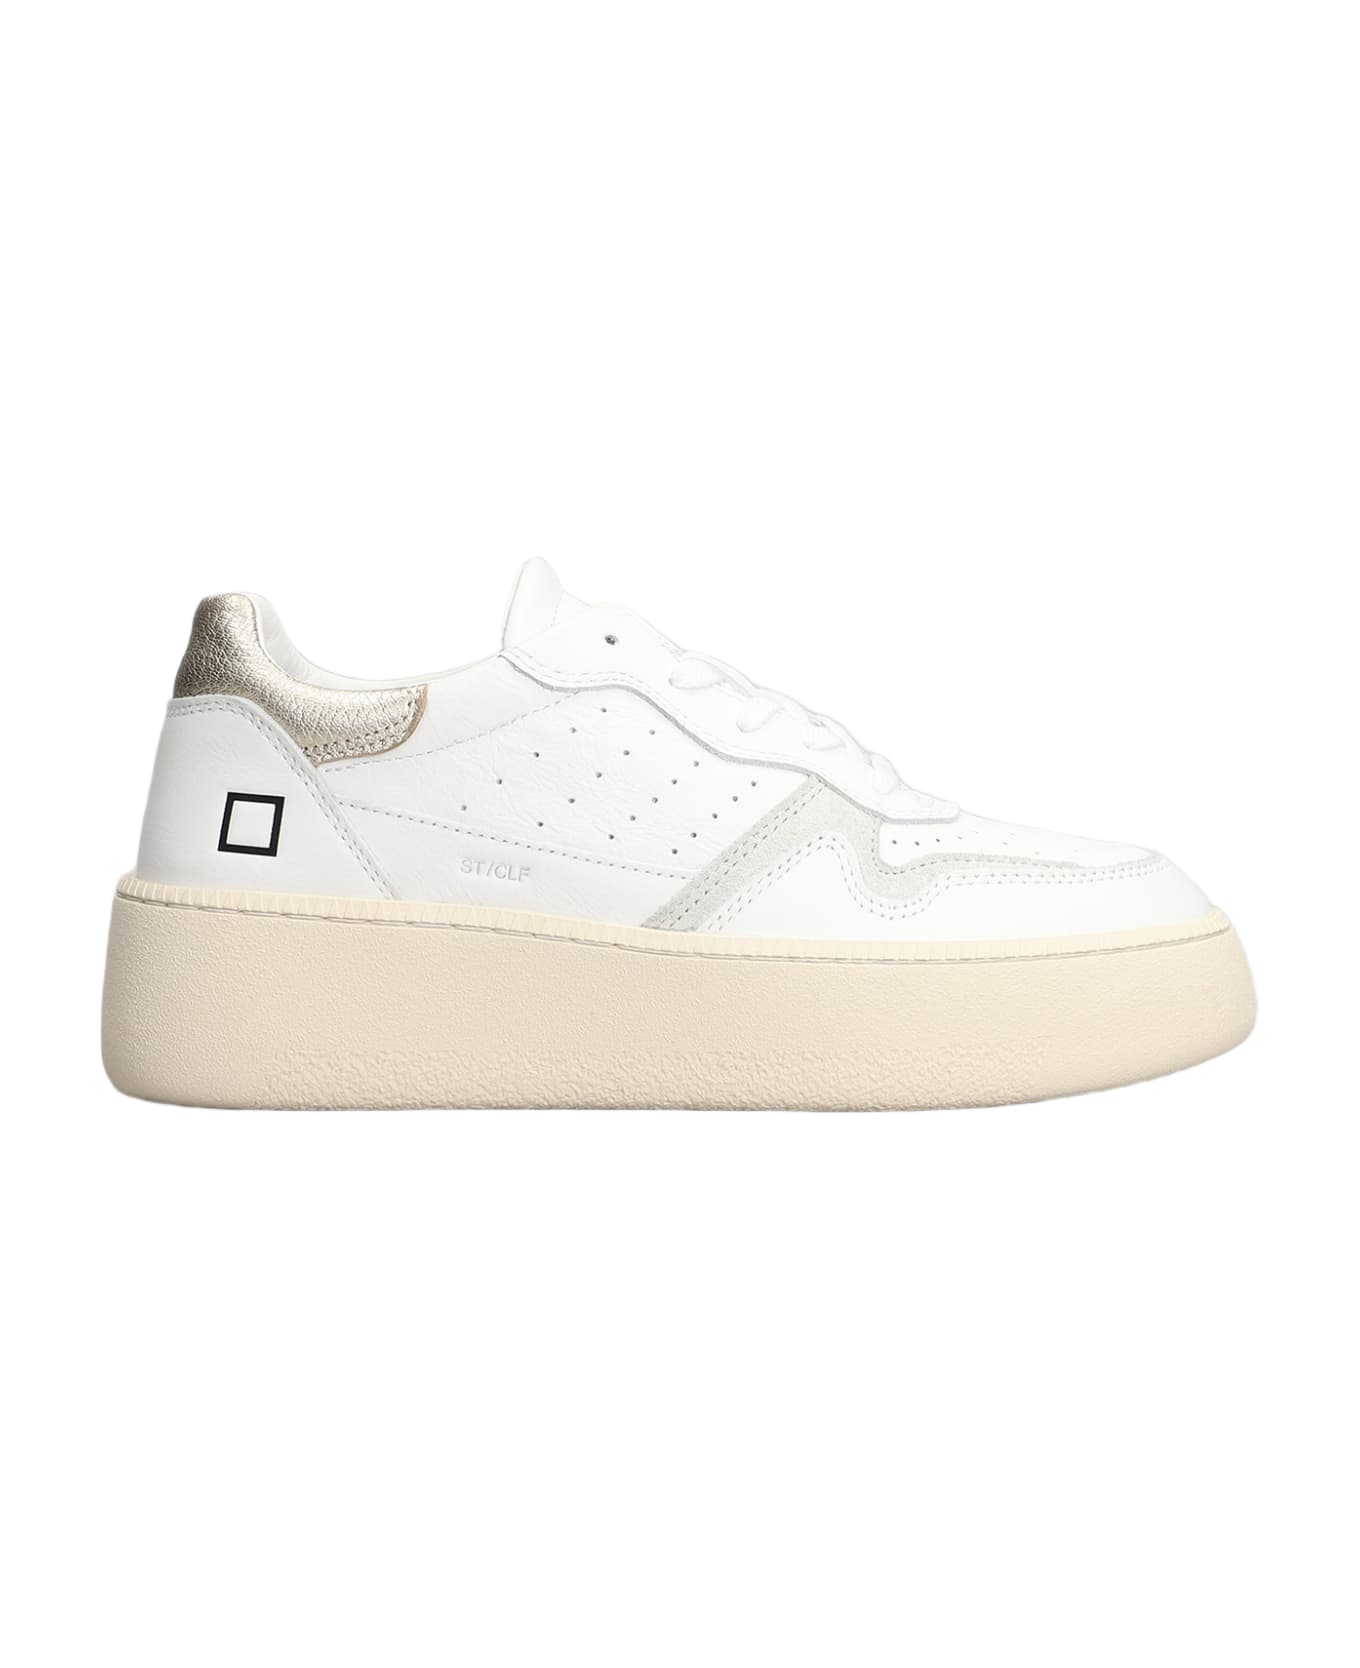 D.A.T.E. Step Sneakers In White Leather - Bianco/Platino